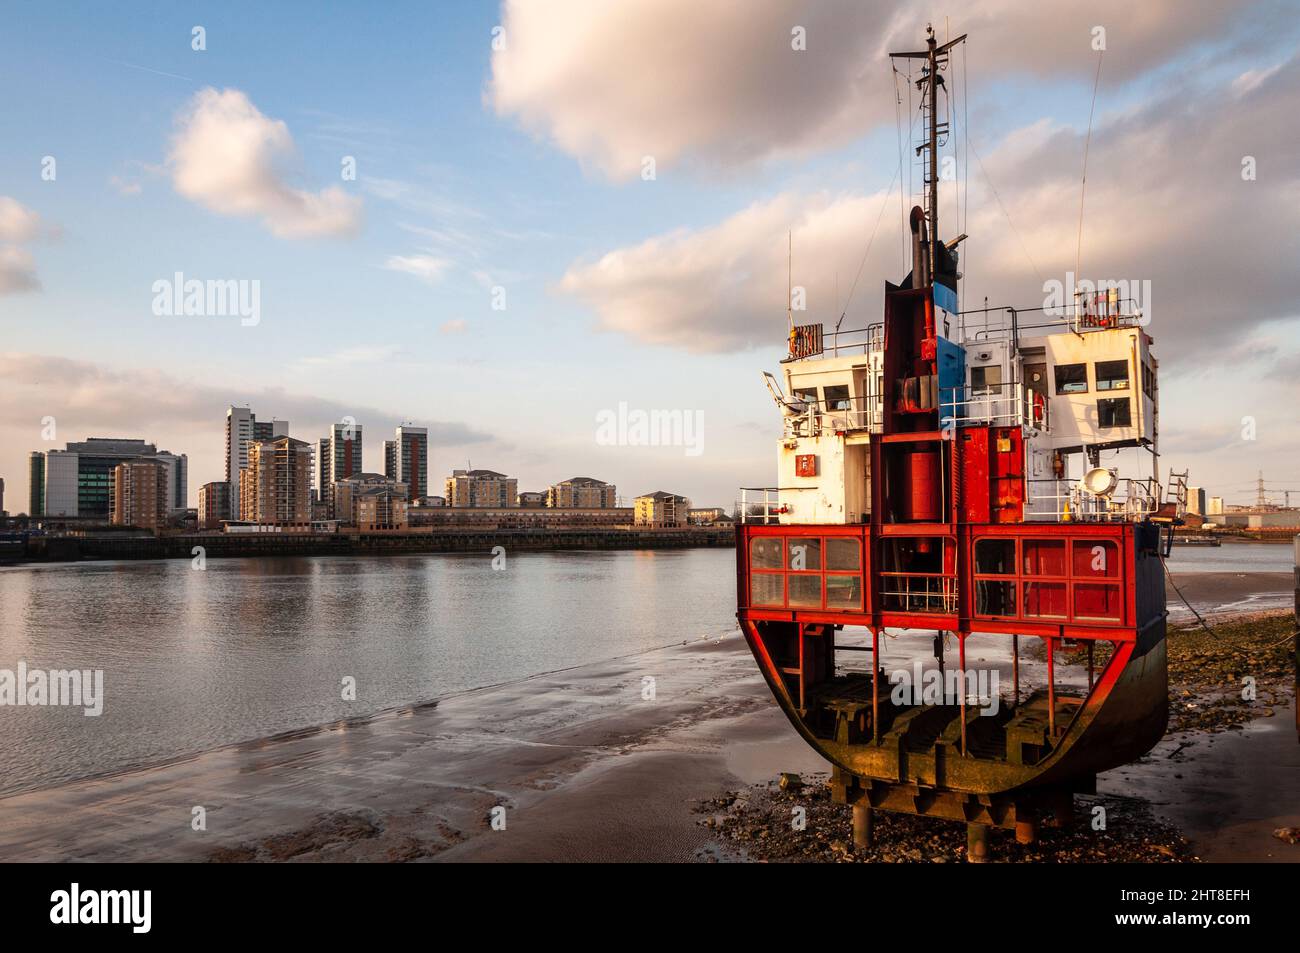 London, England, UK - March 22, 2009: A segment of a small cargo ship rests on the side of the River Thames at North Greenwich, an art installation by Stock Photo